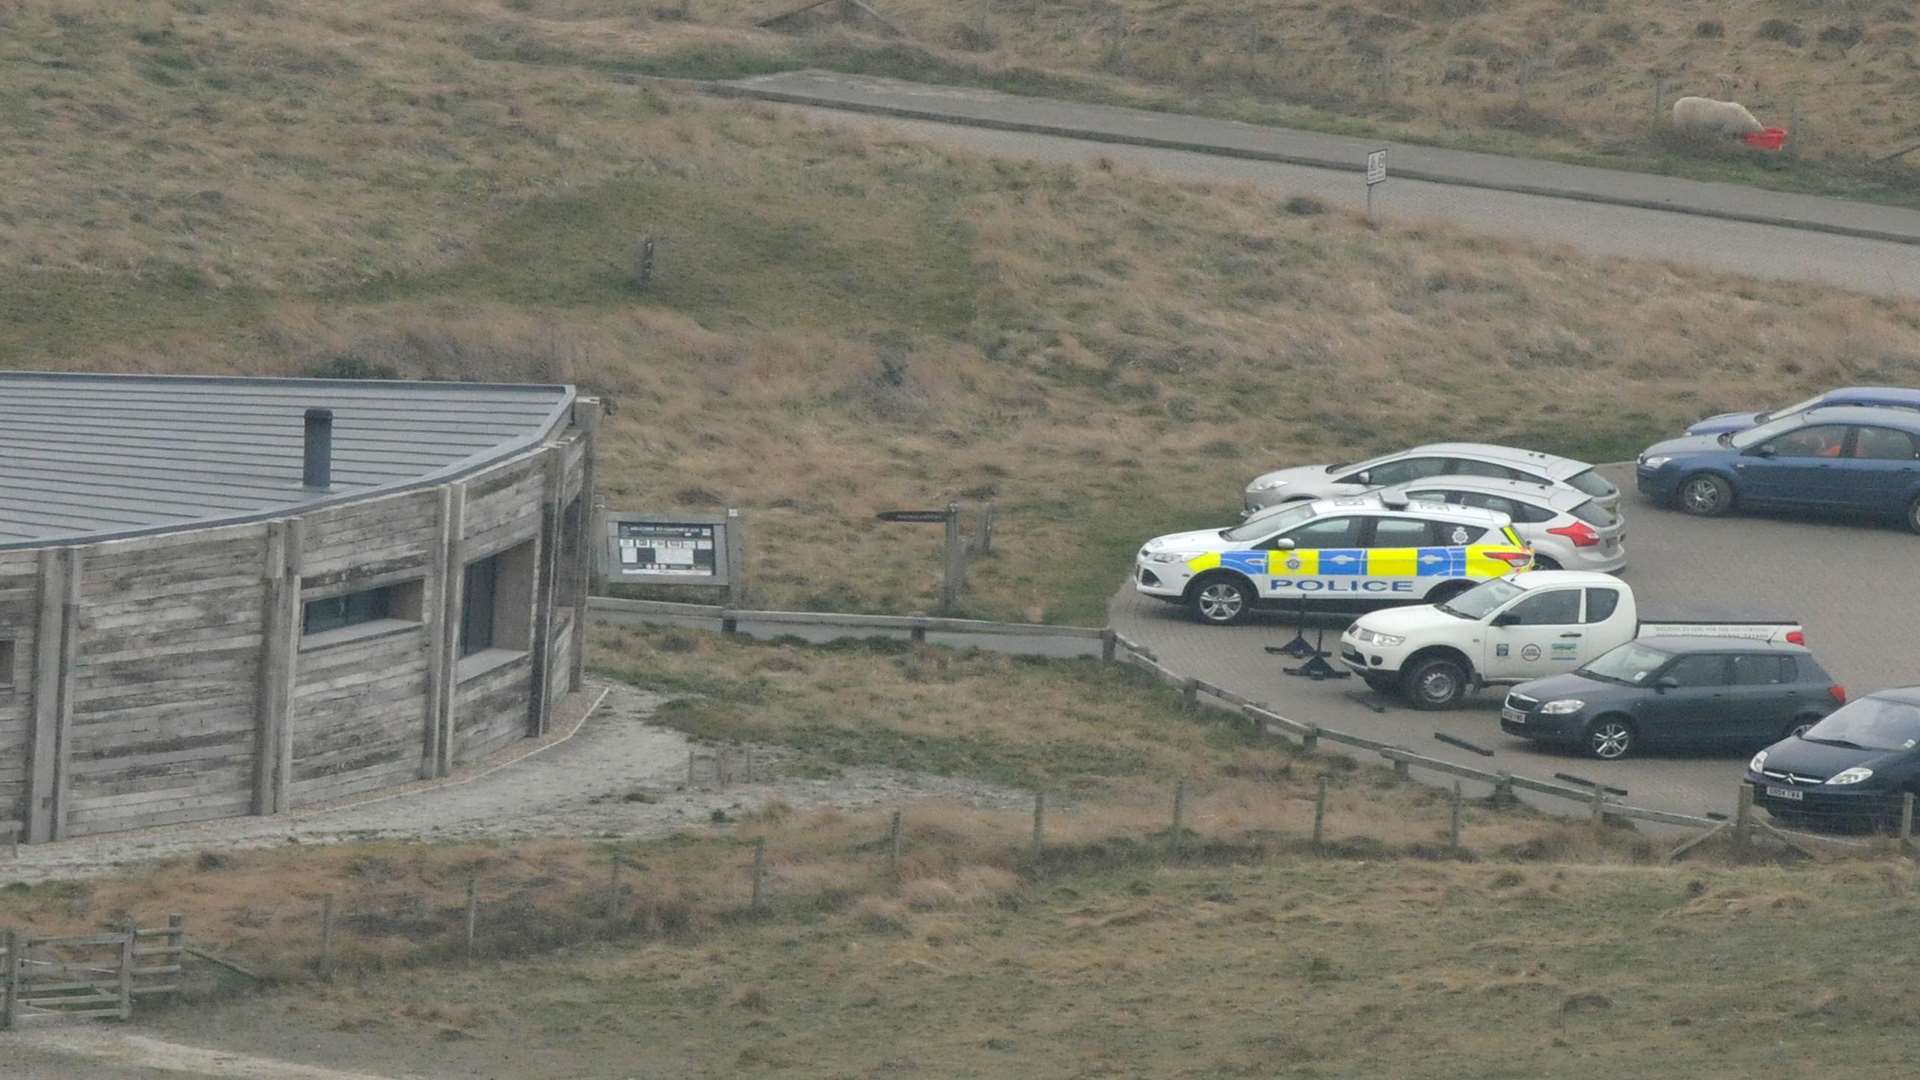 Emergency crews were called after the shells were found